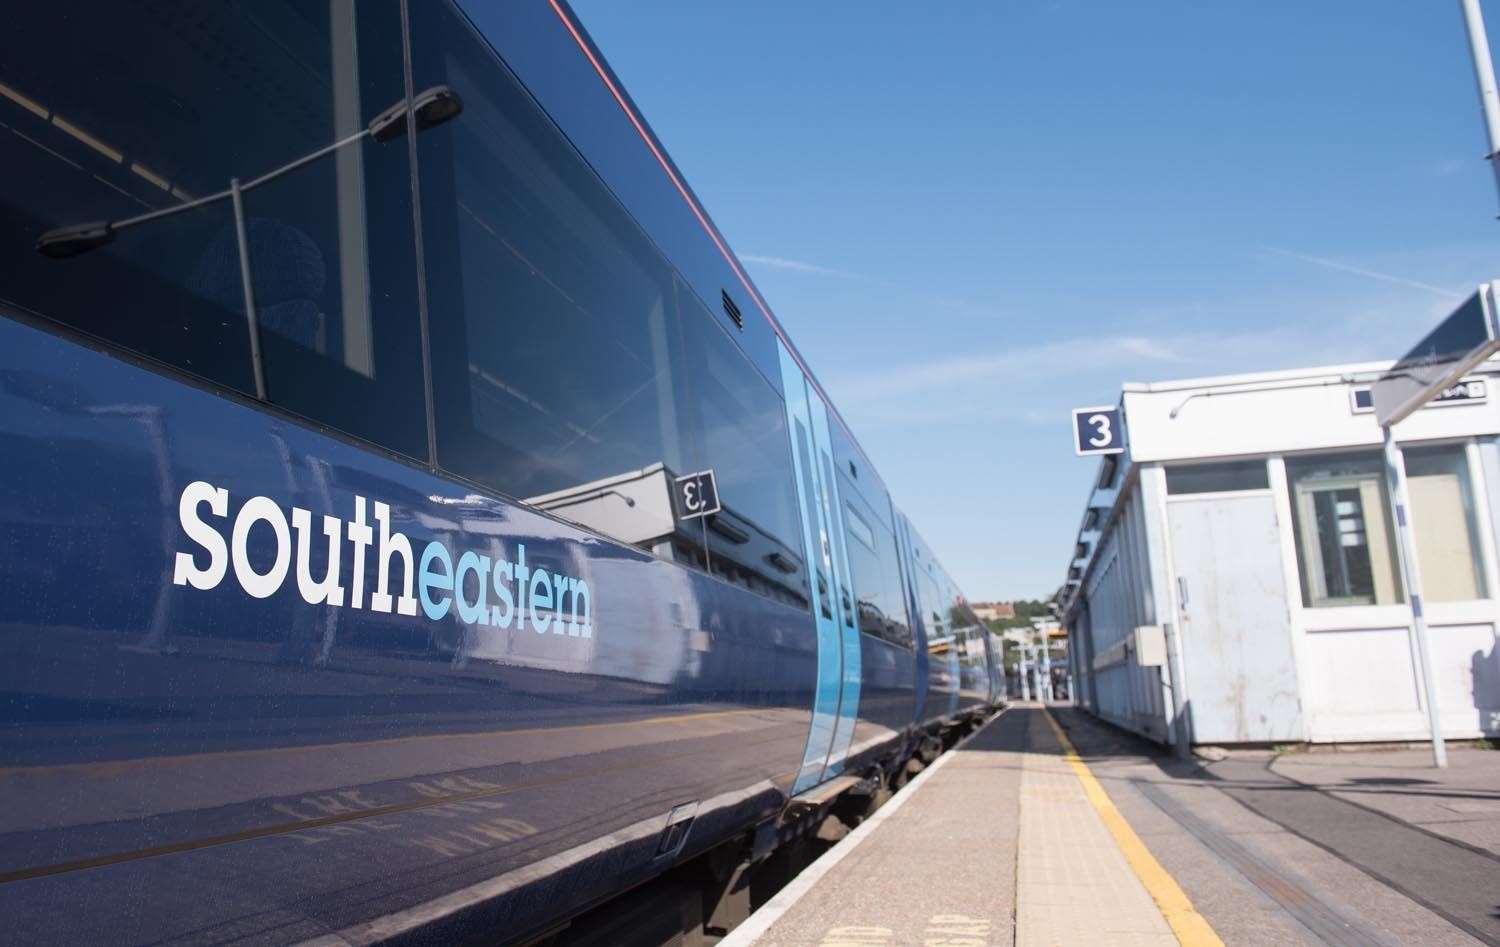 Southeastern hands over its franchise for the majority of Kent's train services in a matter of days